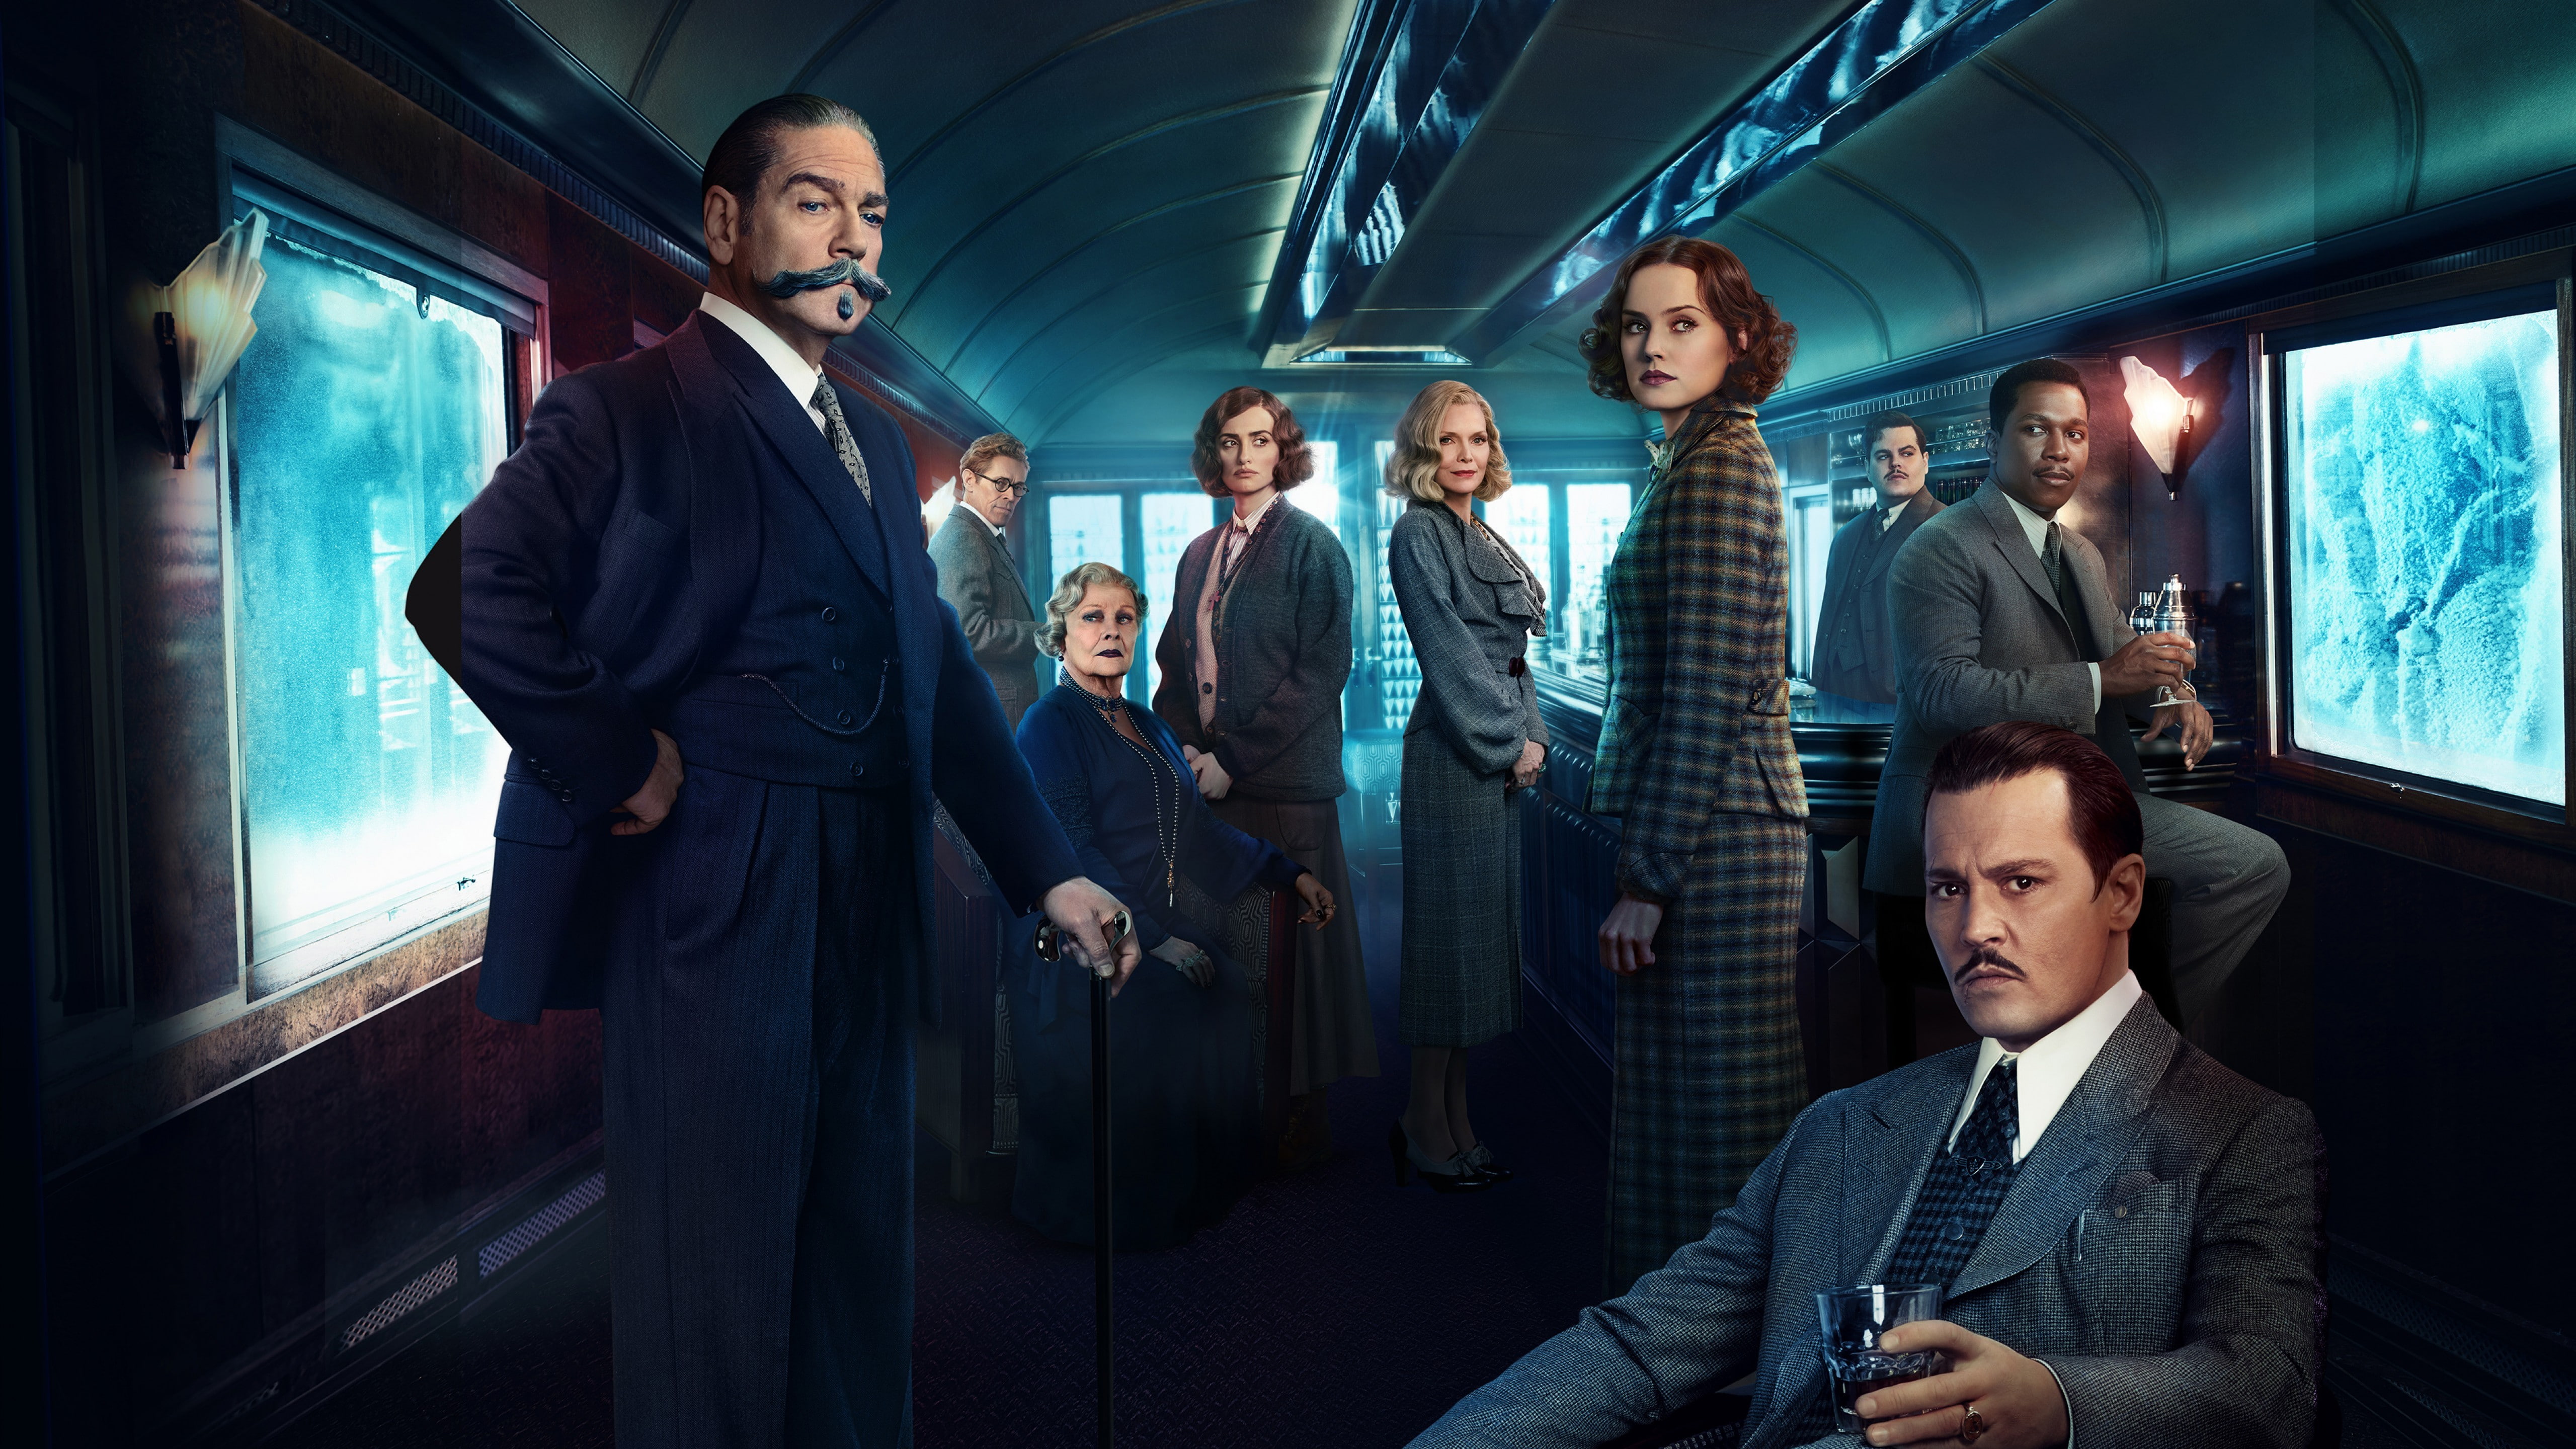 game application characters poster, Murder on the Orient Express